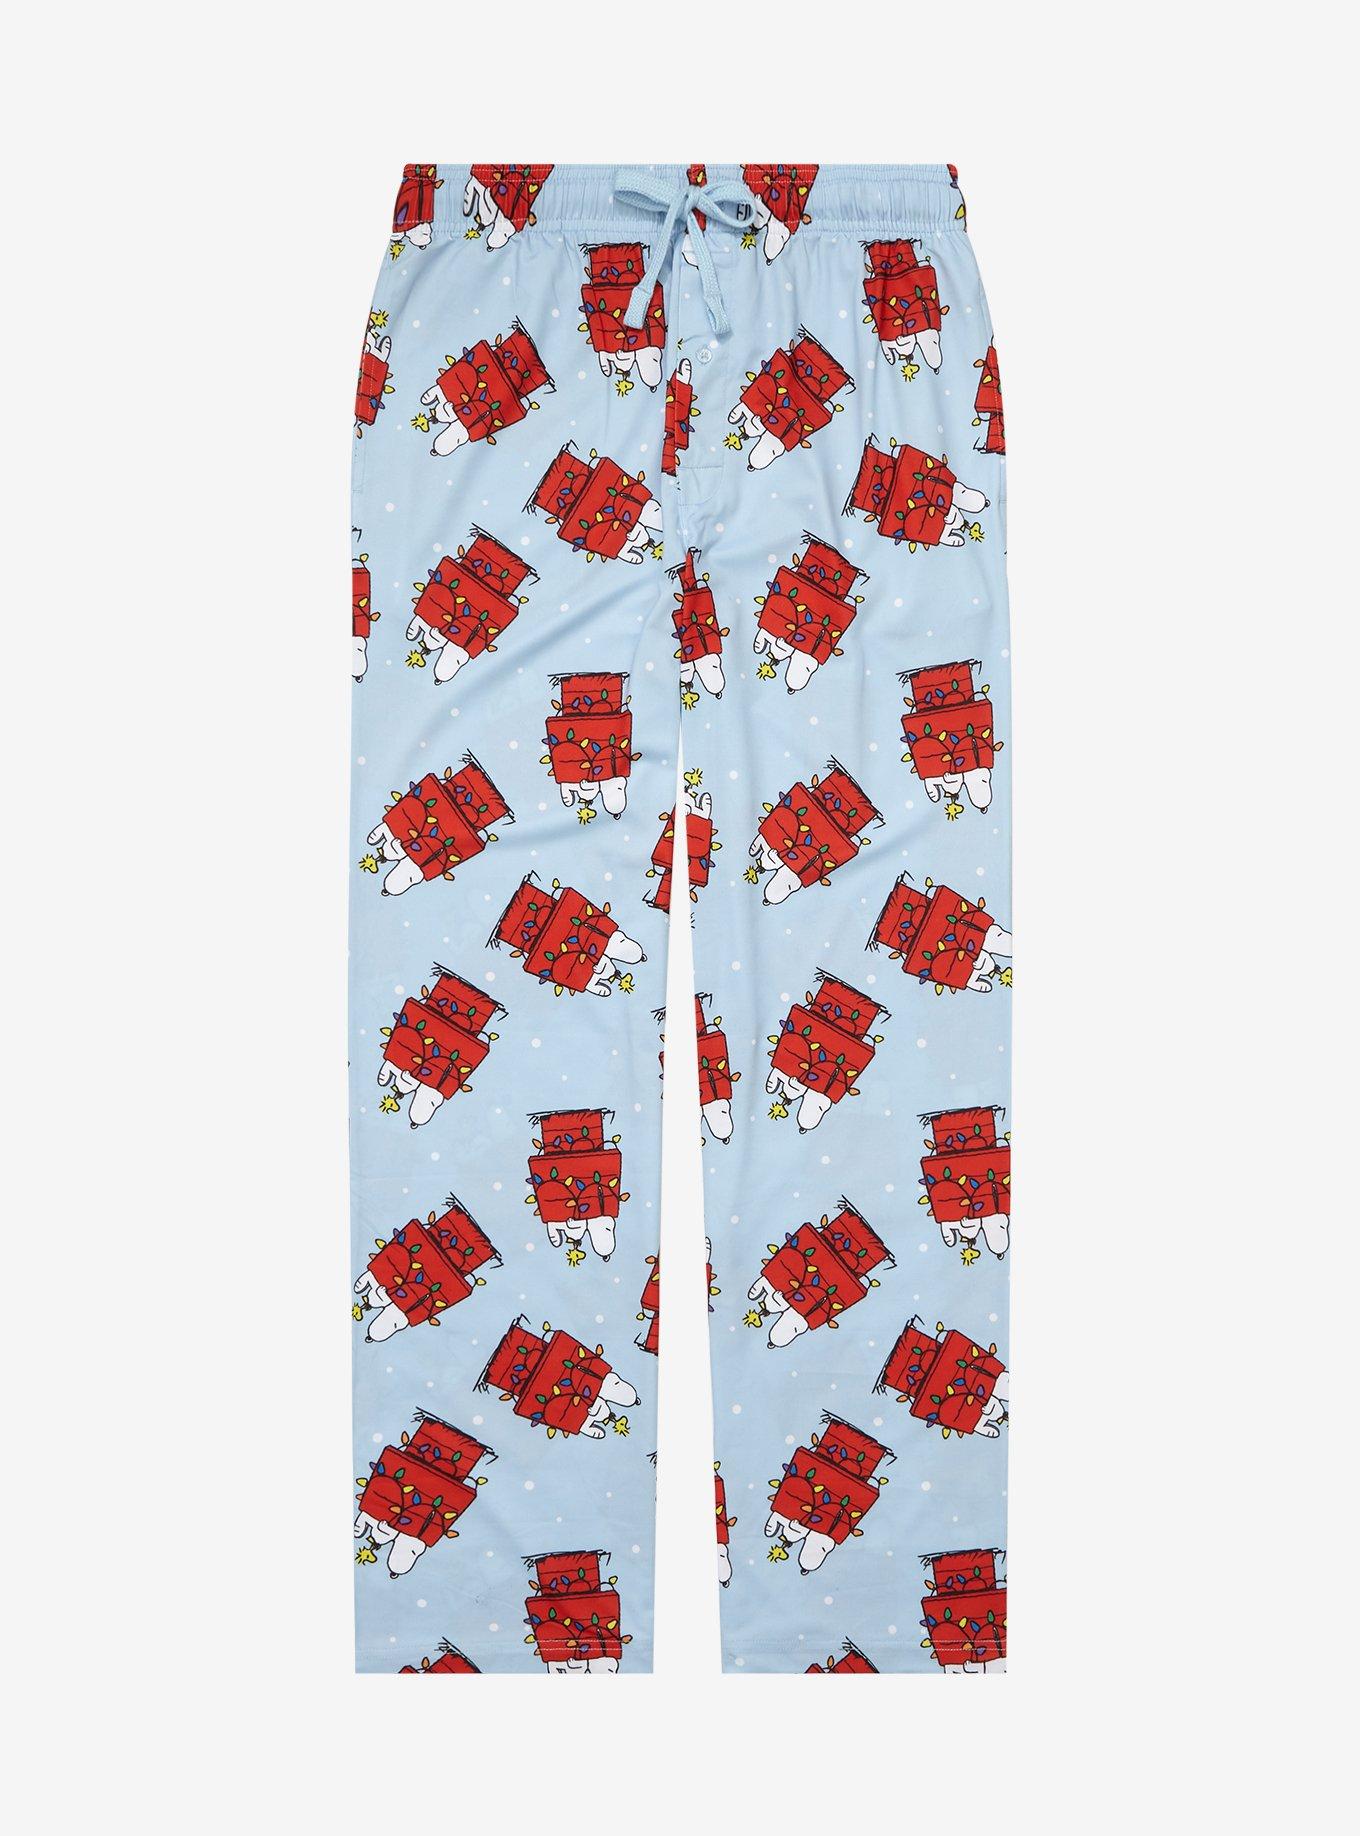 My favorite pajama pants are these Christmas fuzzy pants that have snoopy  from peanuts : r/pajamapants